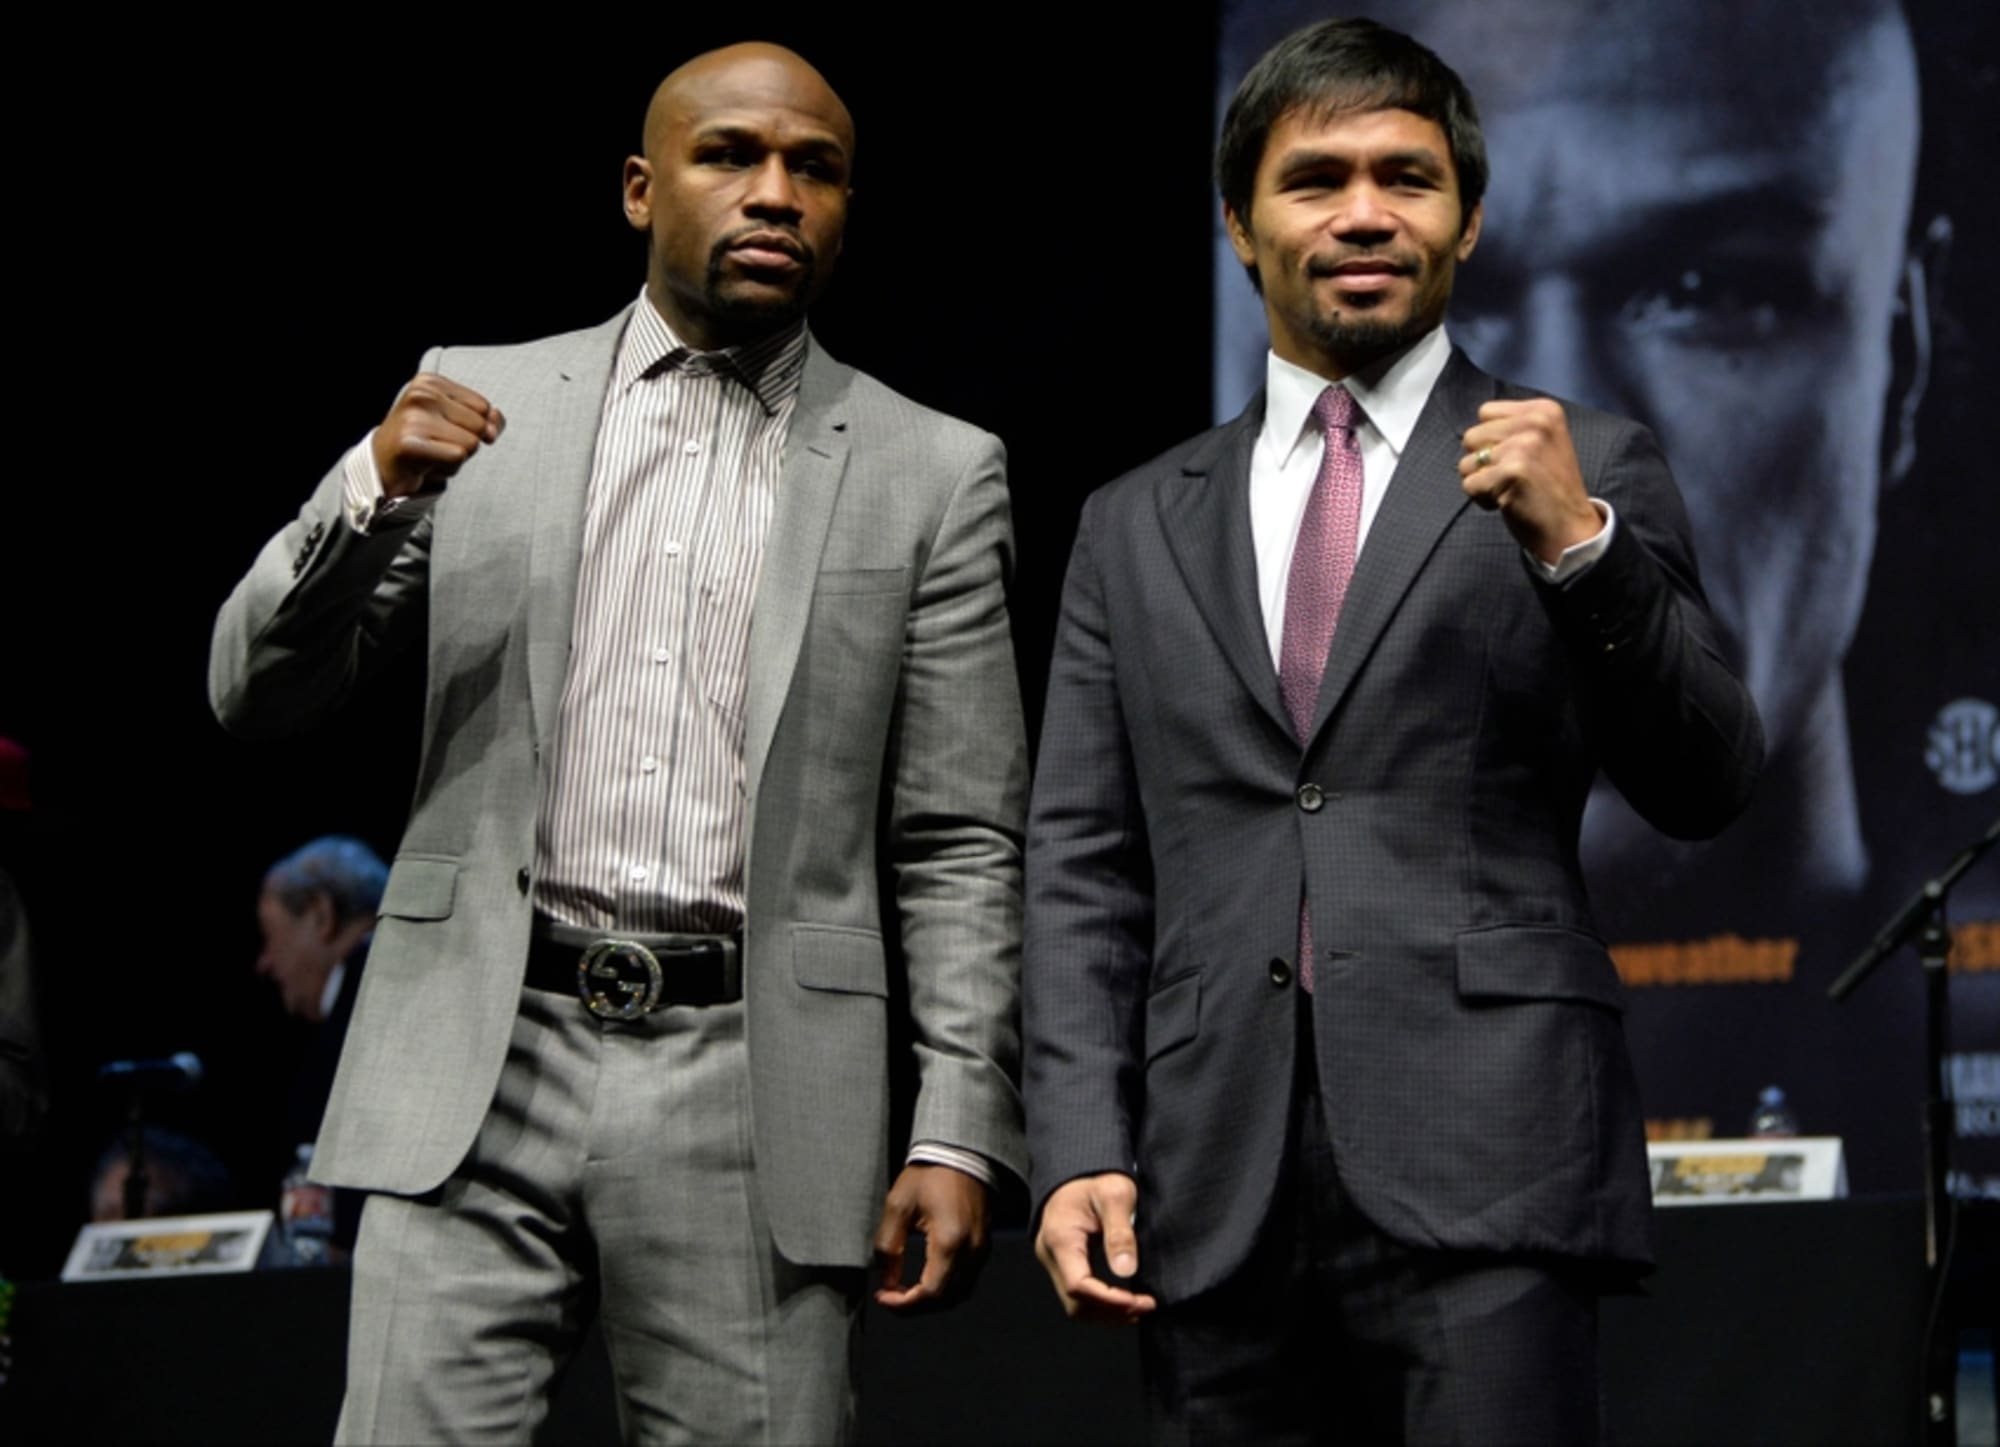 Floyd Mayweather Vs Manny Pacquiao To Have Record Ppv Price